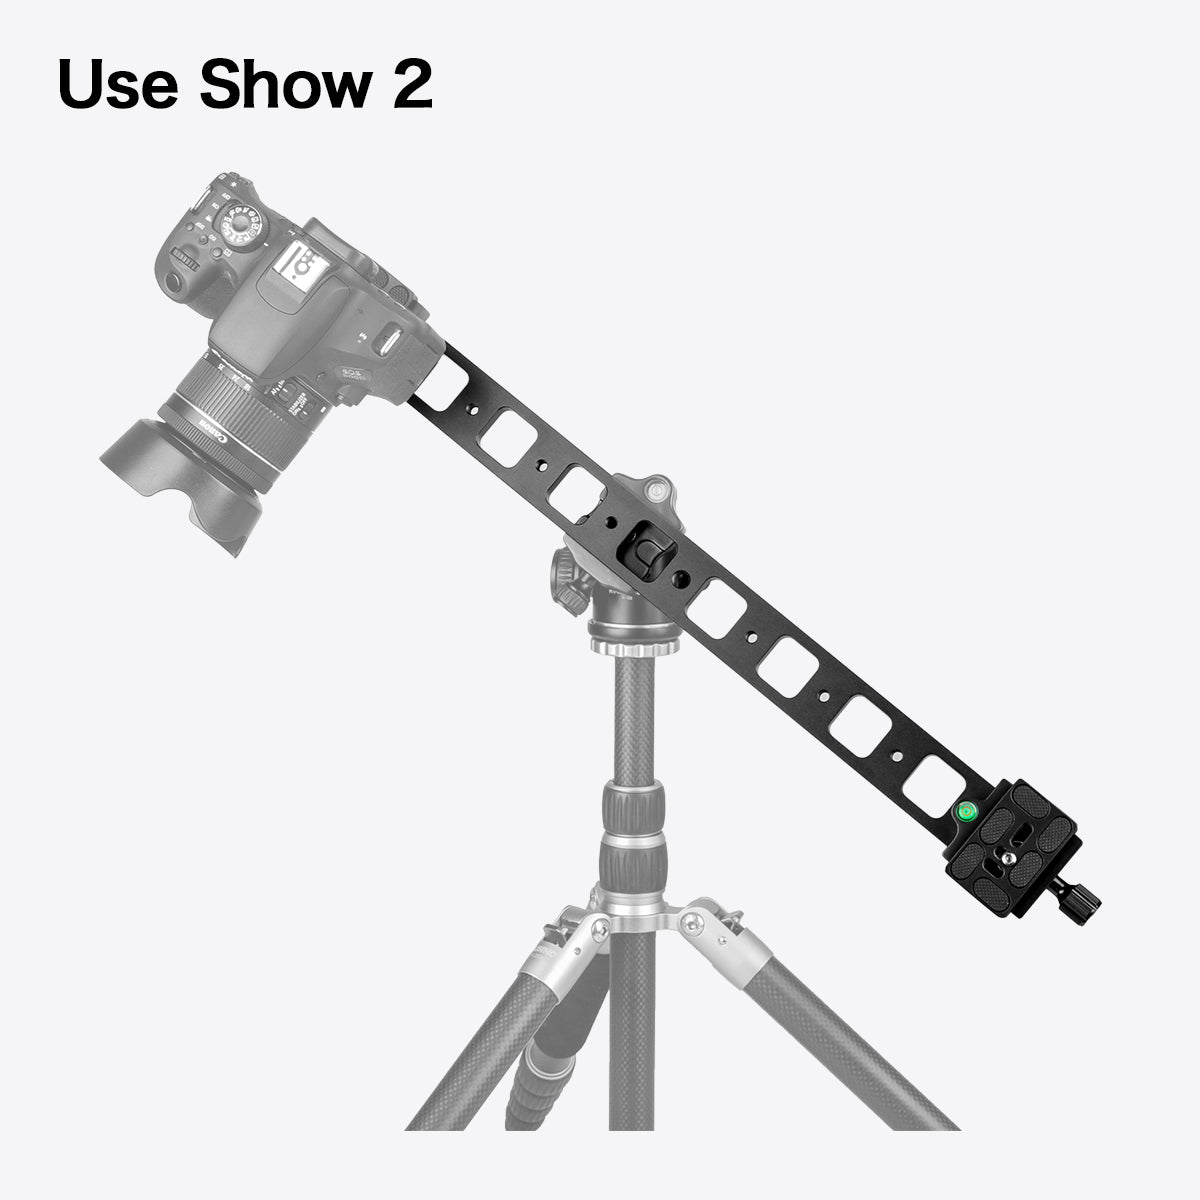 Aluminium 480mm Professional Rail Nodal Slide Metal Quick Release Clamp for Camera with Arca Swiss Compatible for Tripod Ballhead